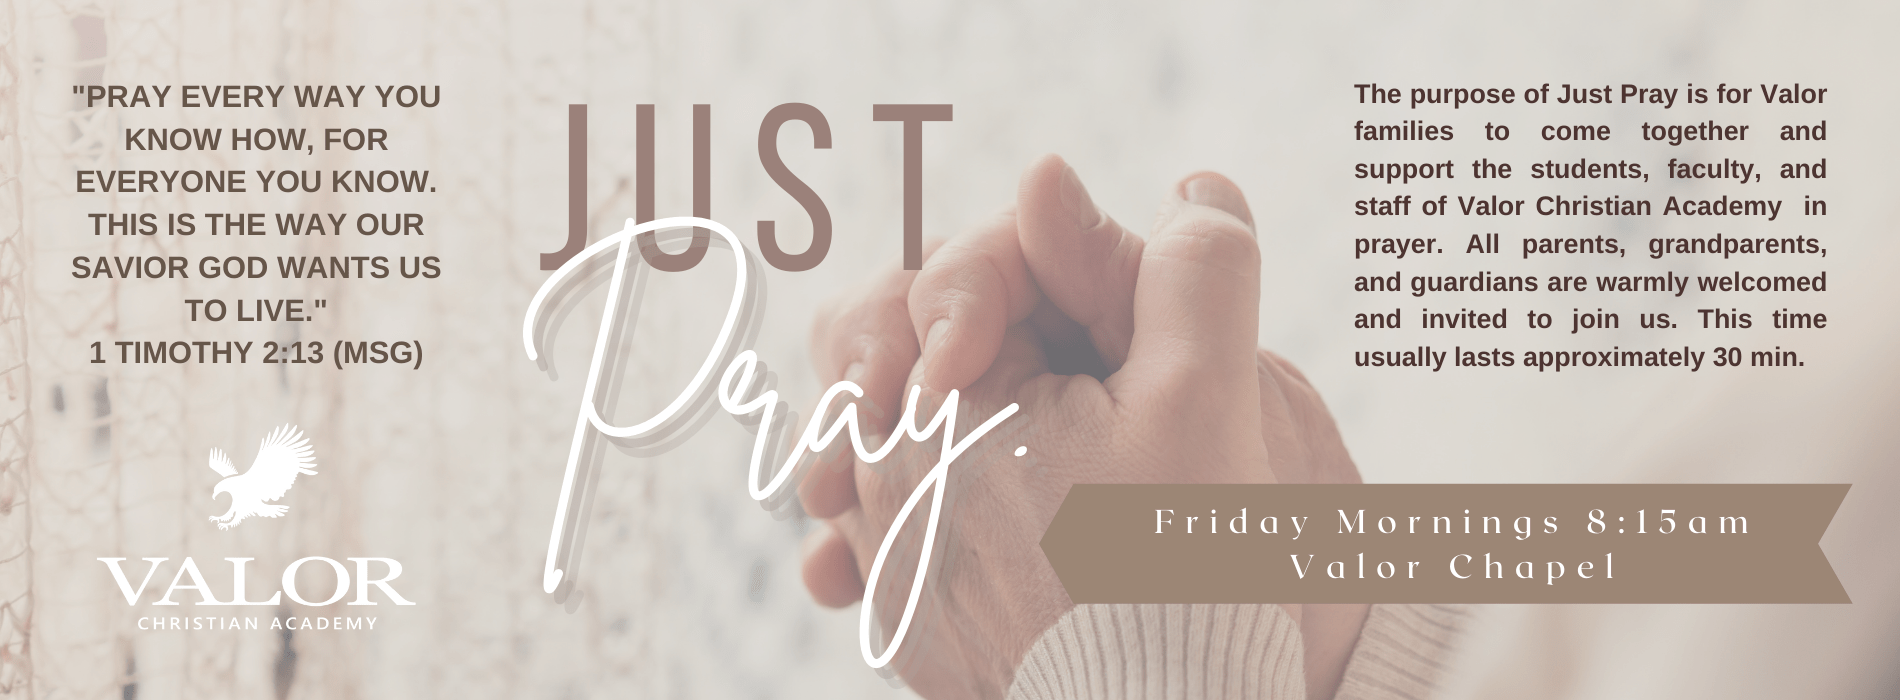 Just Pray takes place Fridays at 8:15 AM - links to Just Pray page